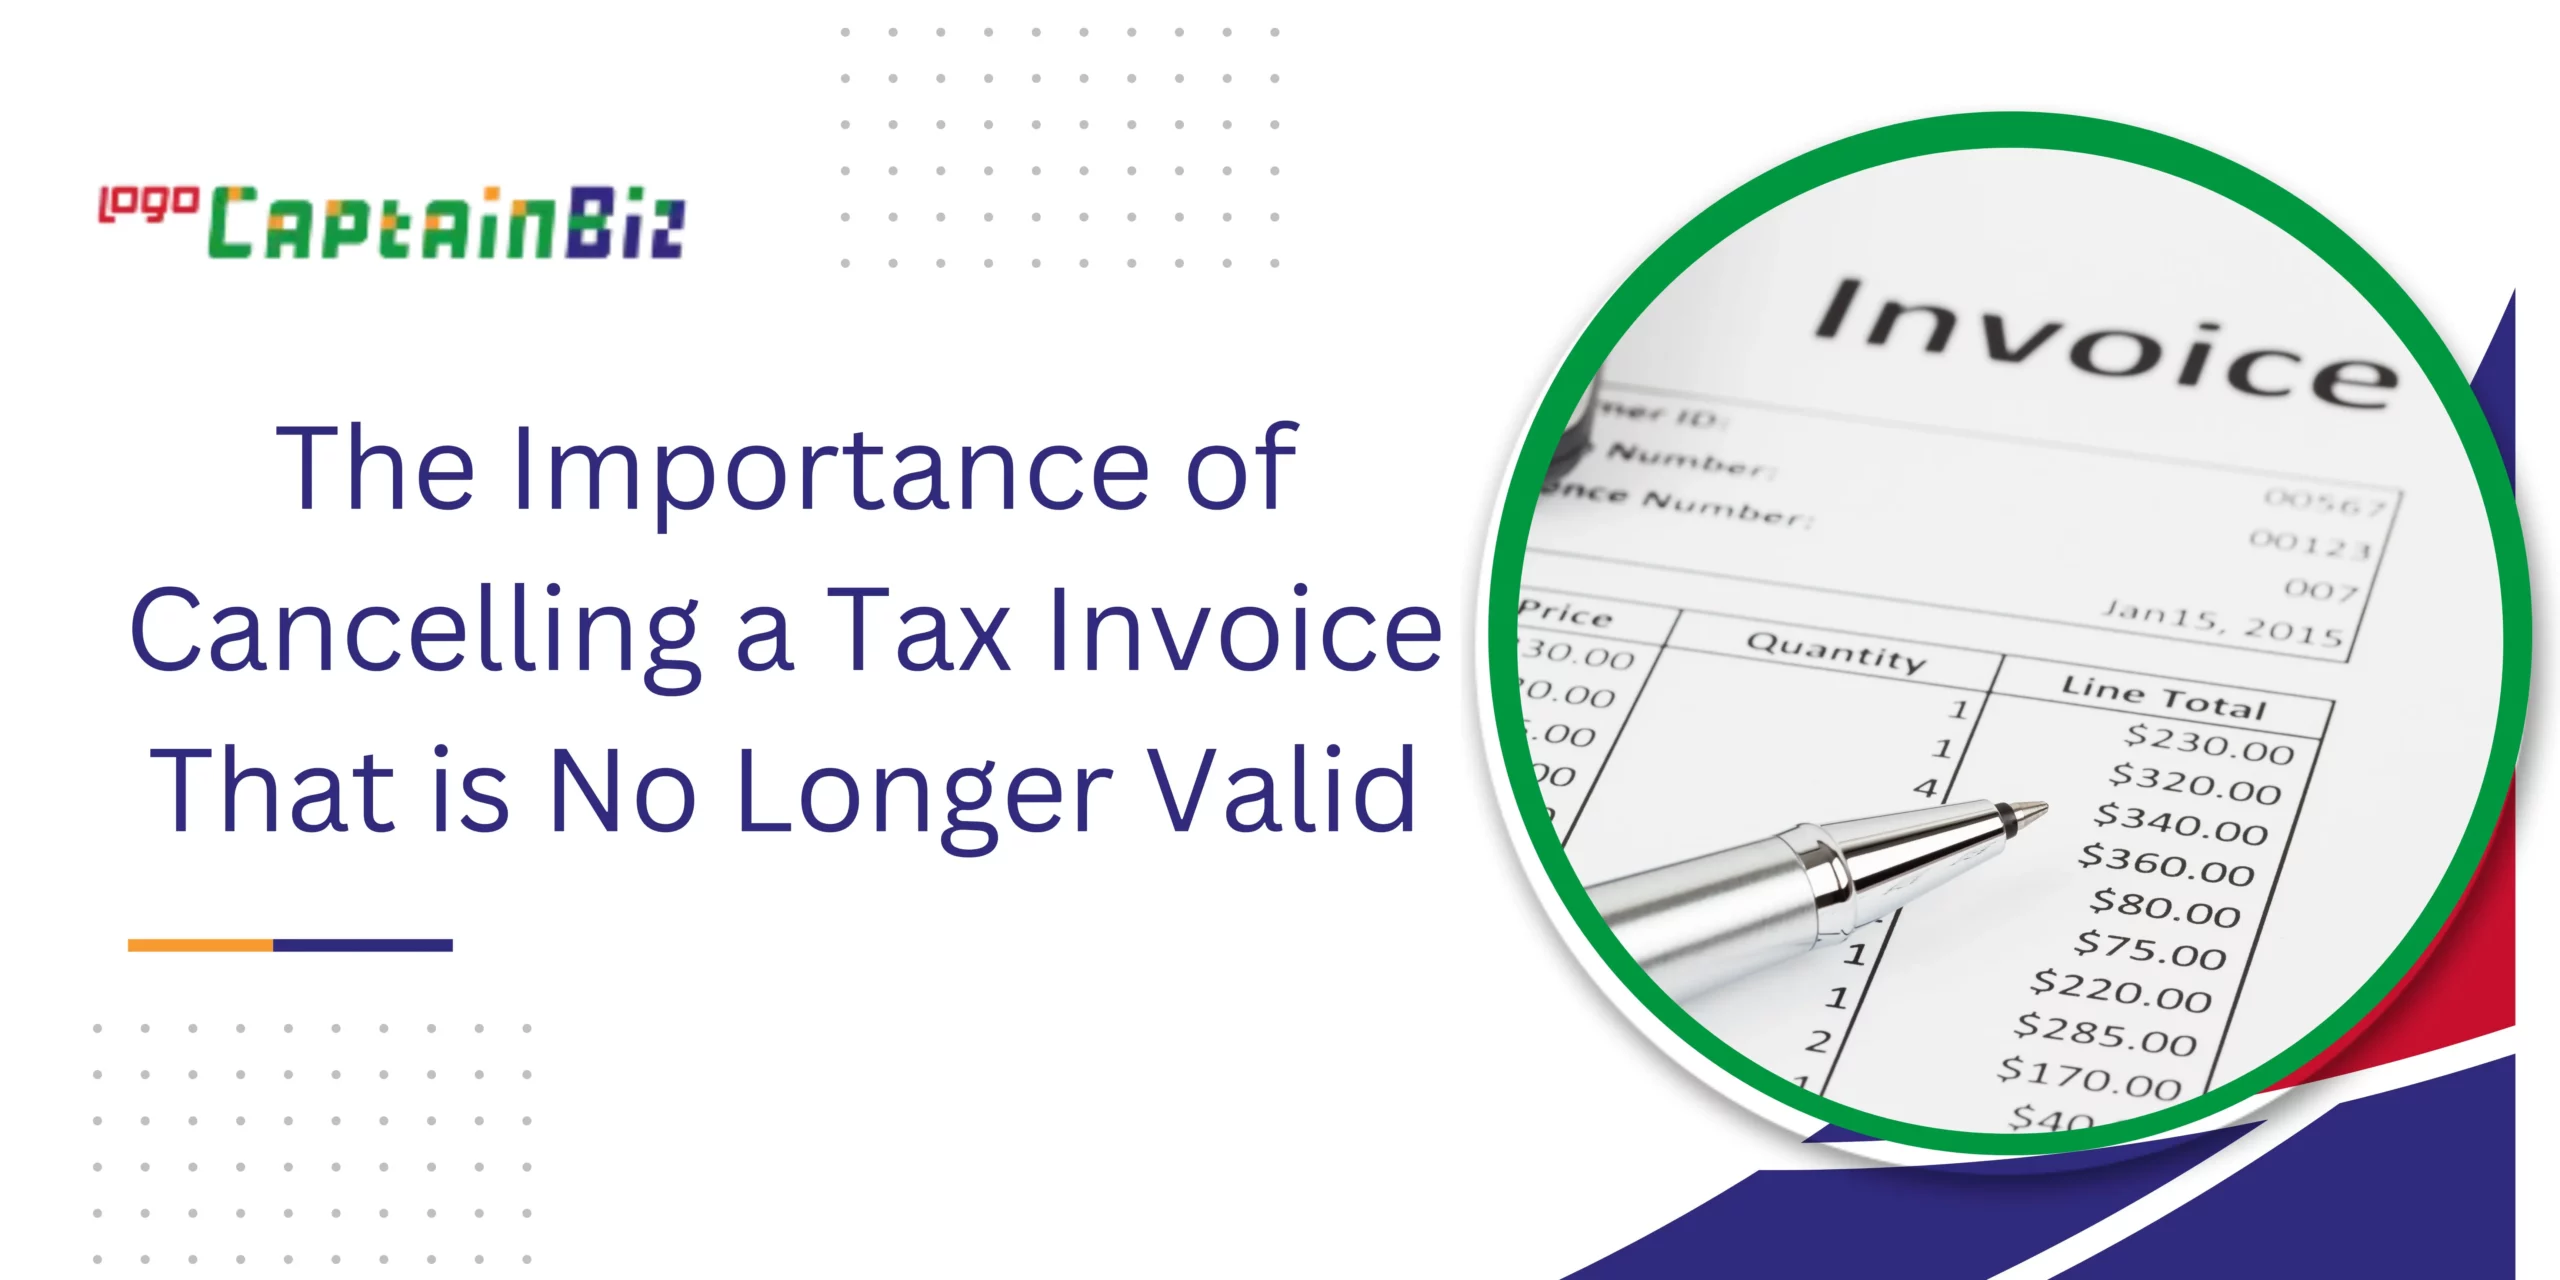 CaptainBiz: The Importance of Cancelling a Tax Invoice That is No Longer Valid